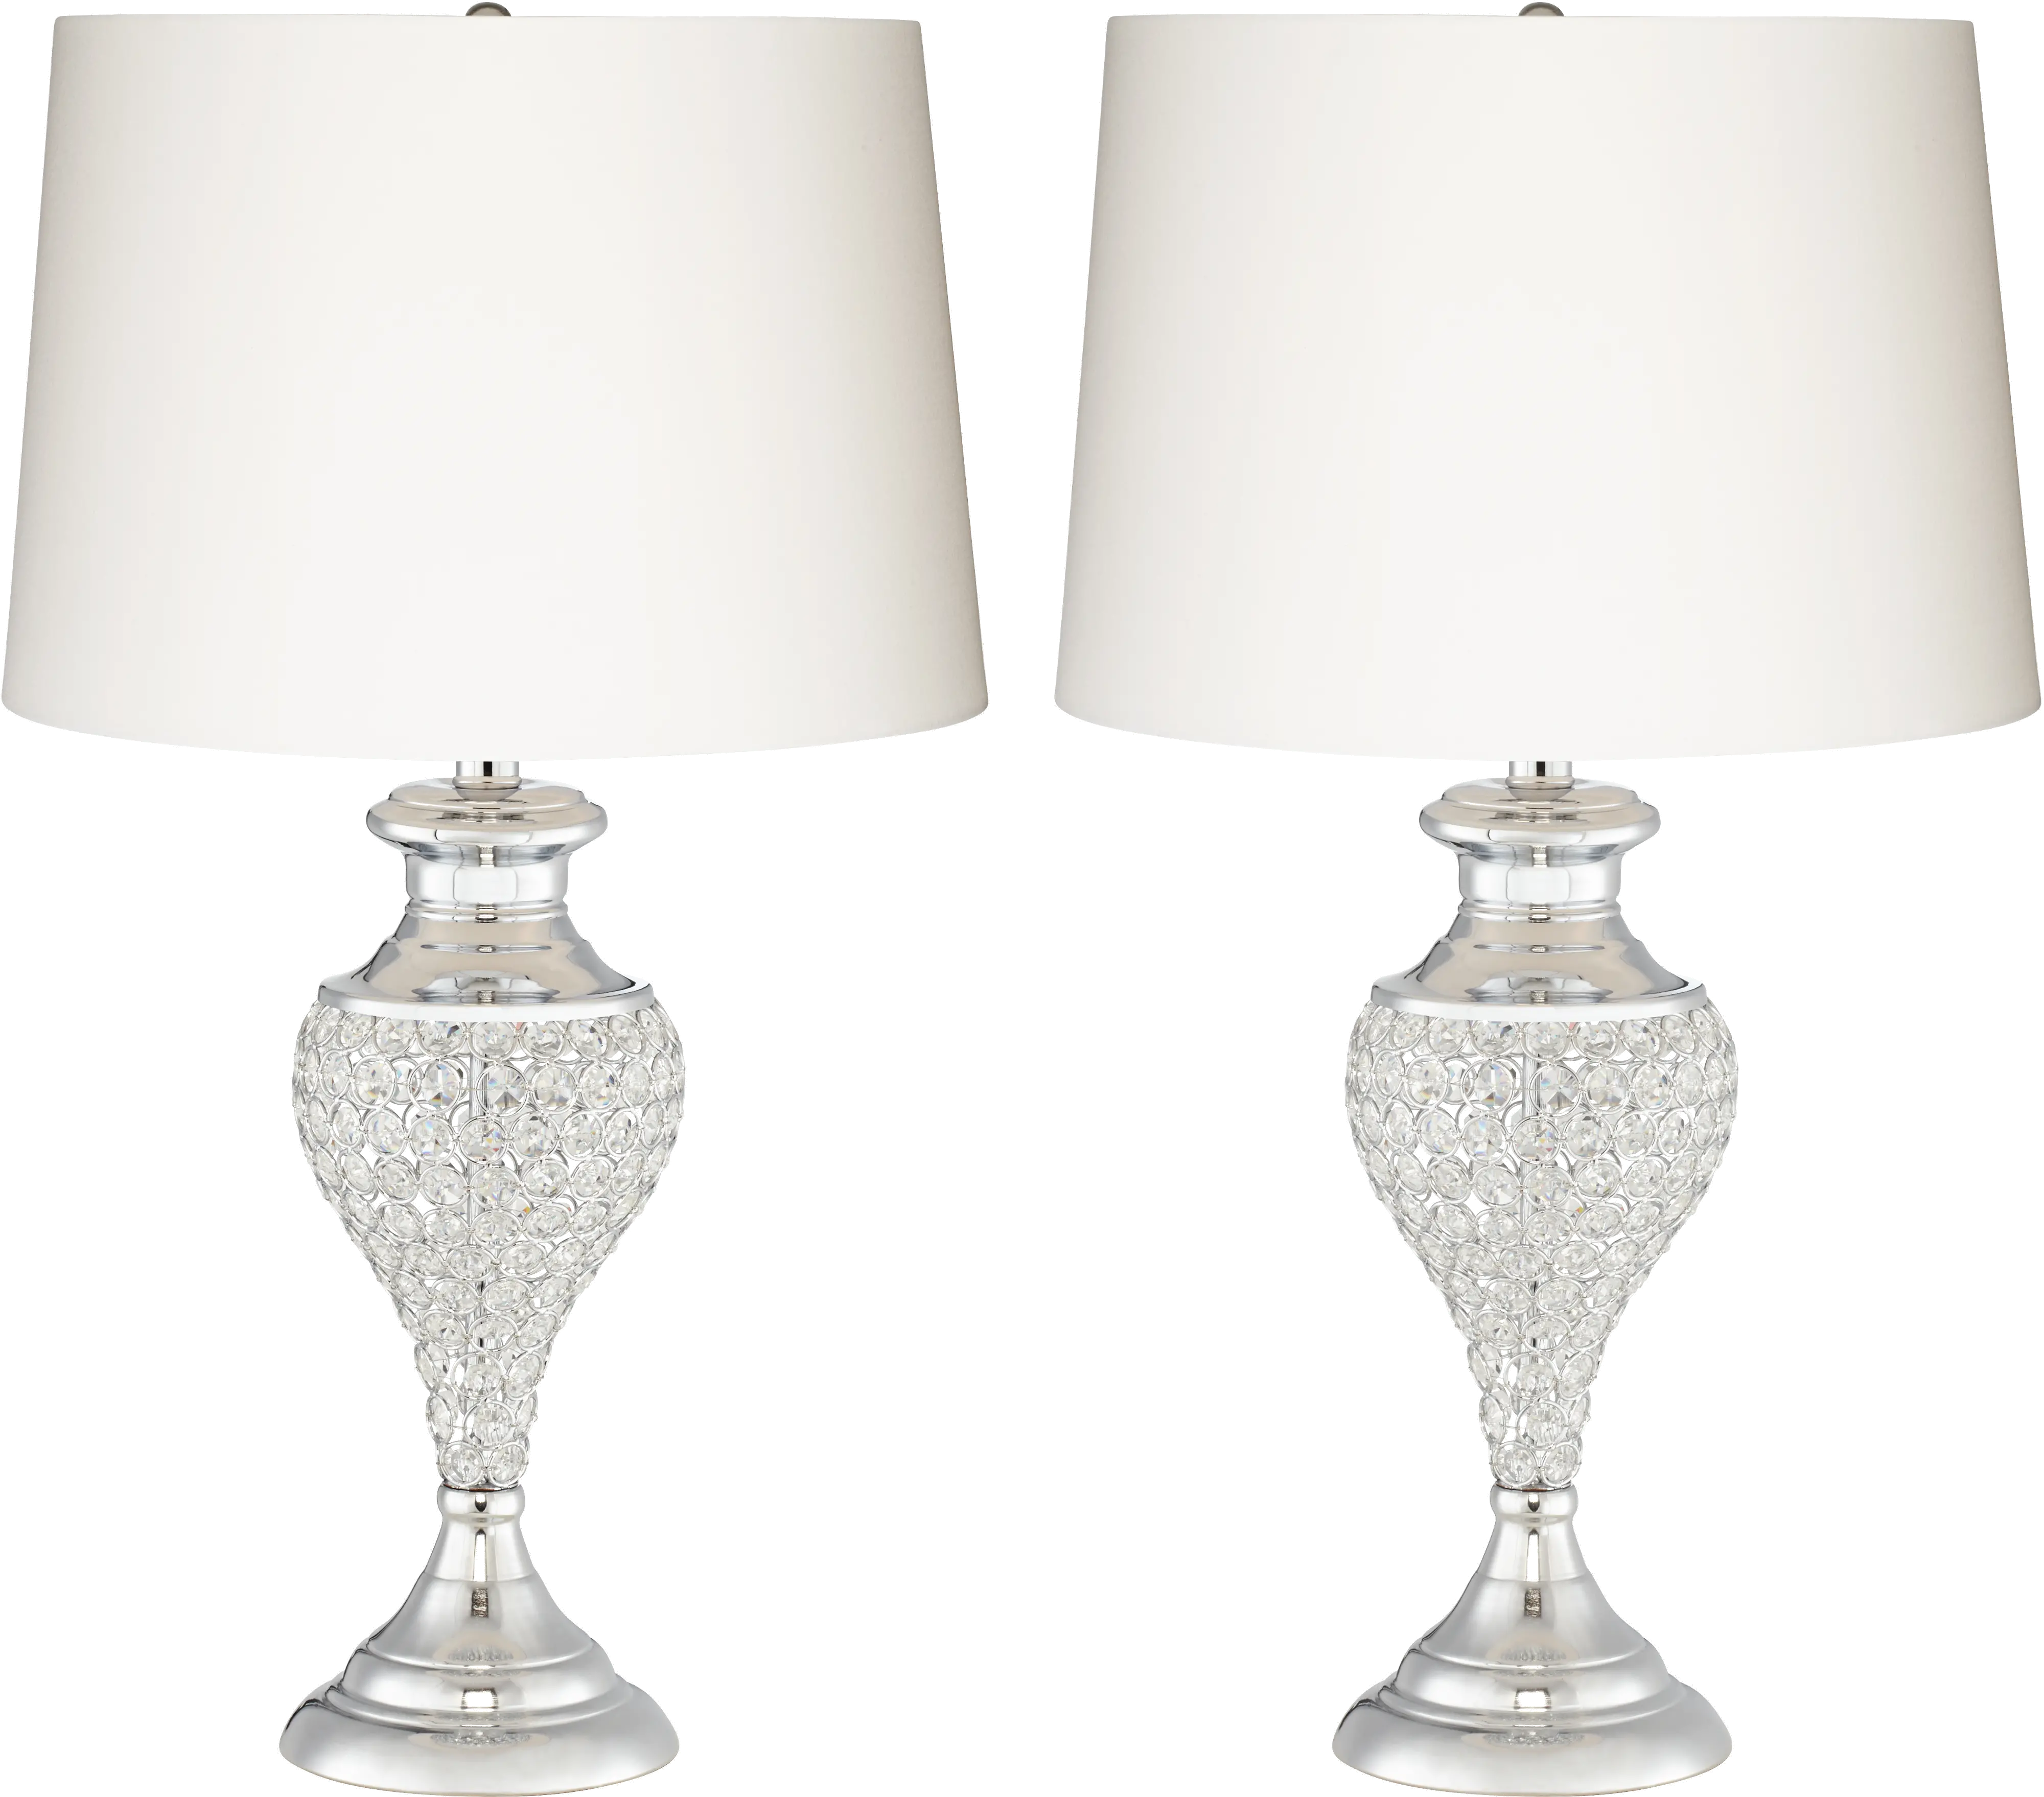 87-7923-26 Polished Chrome Glitz and Glam Pair of Table Lamps sku 87-7923-26